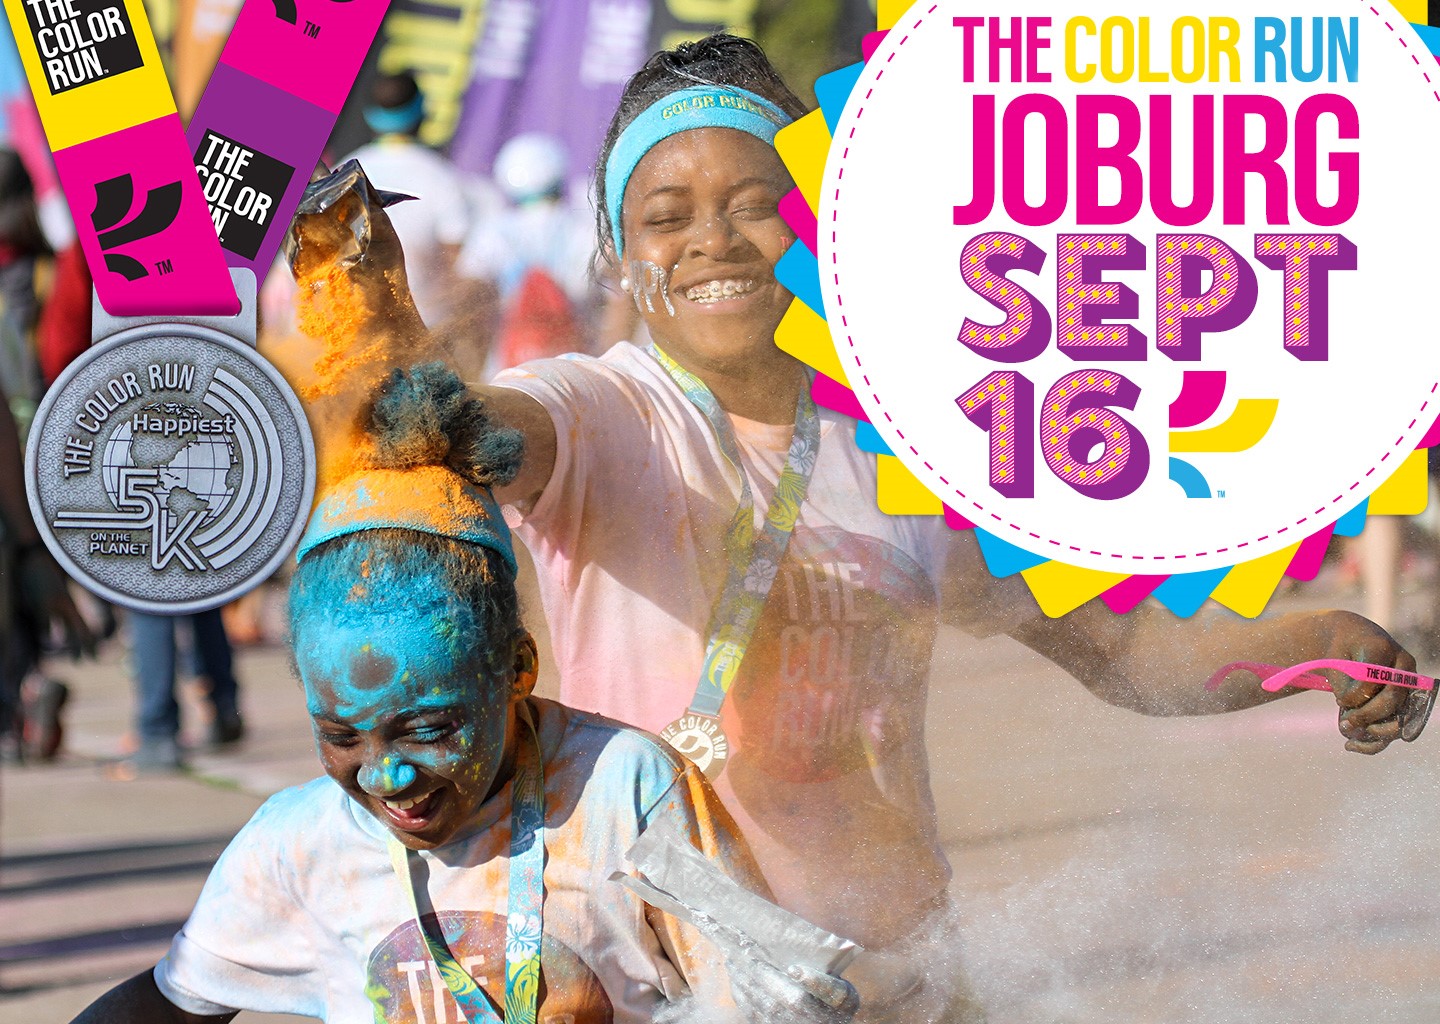 Enter to WIN 2 Adult + 2 Kids tickets and a selection of goodies for the @TheColorRunSA in Johannesburg!